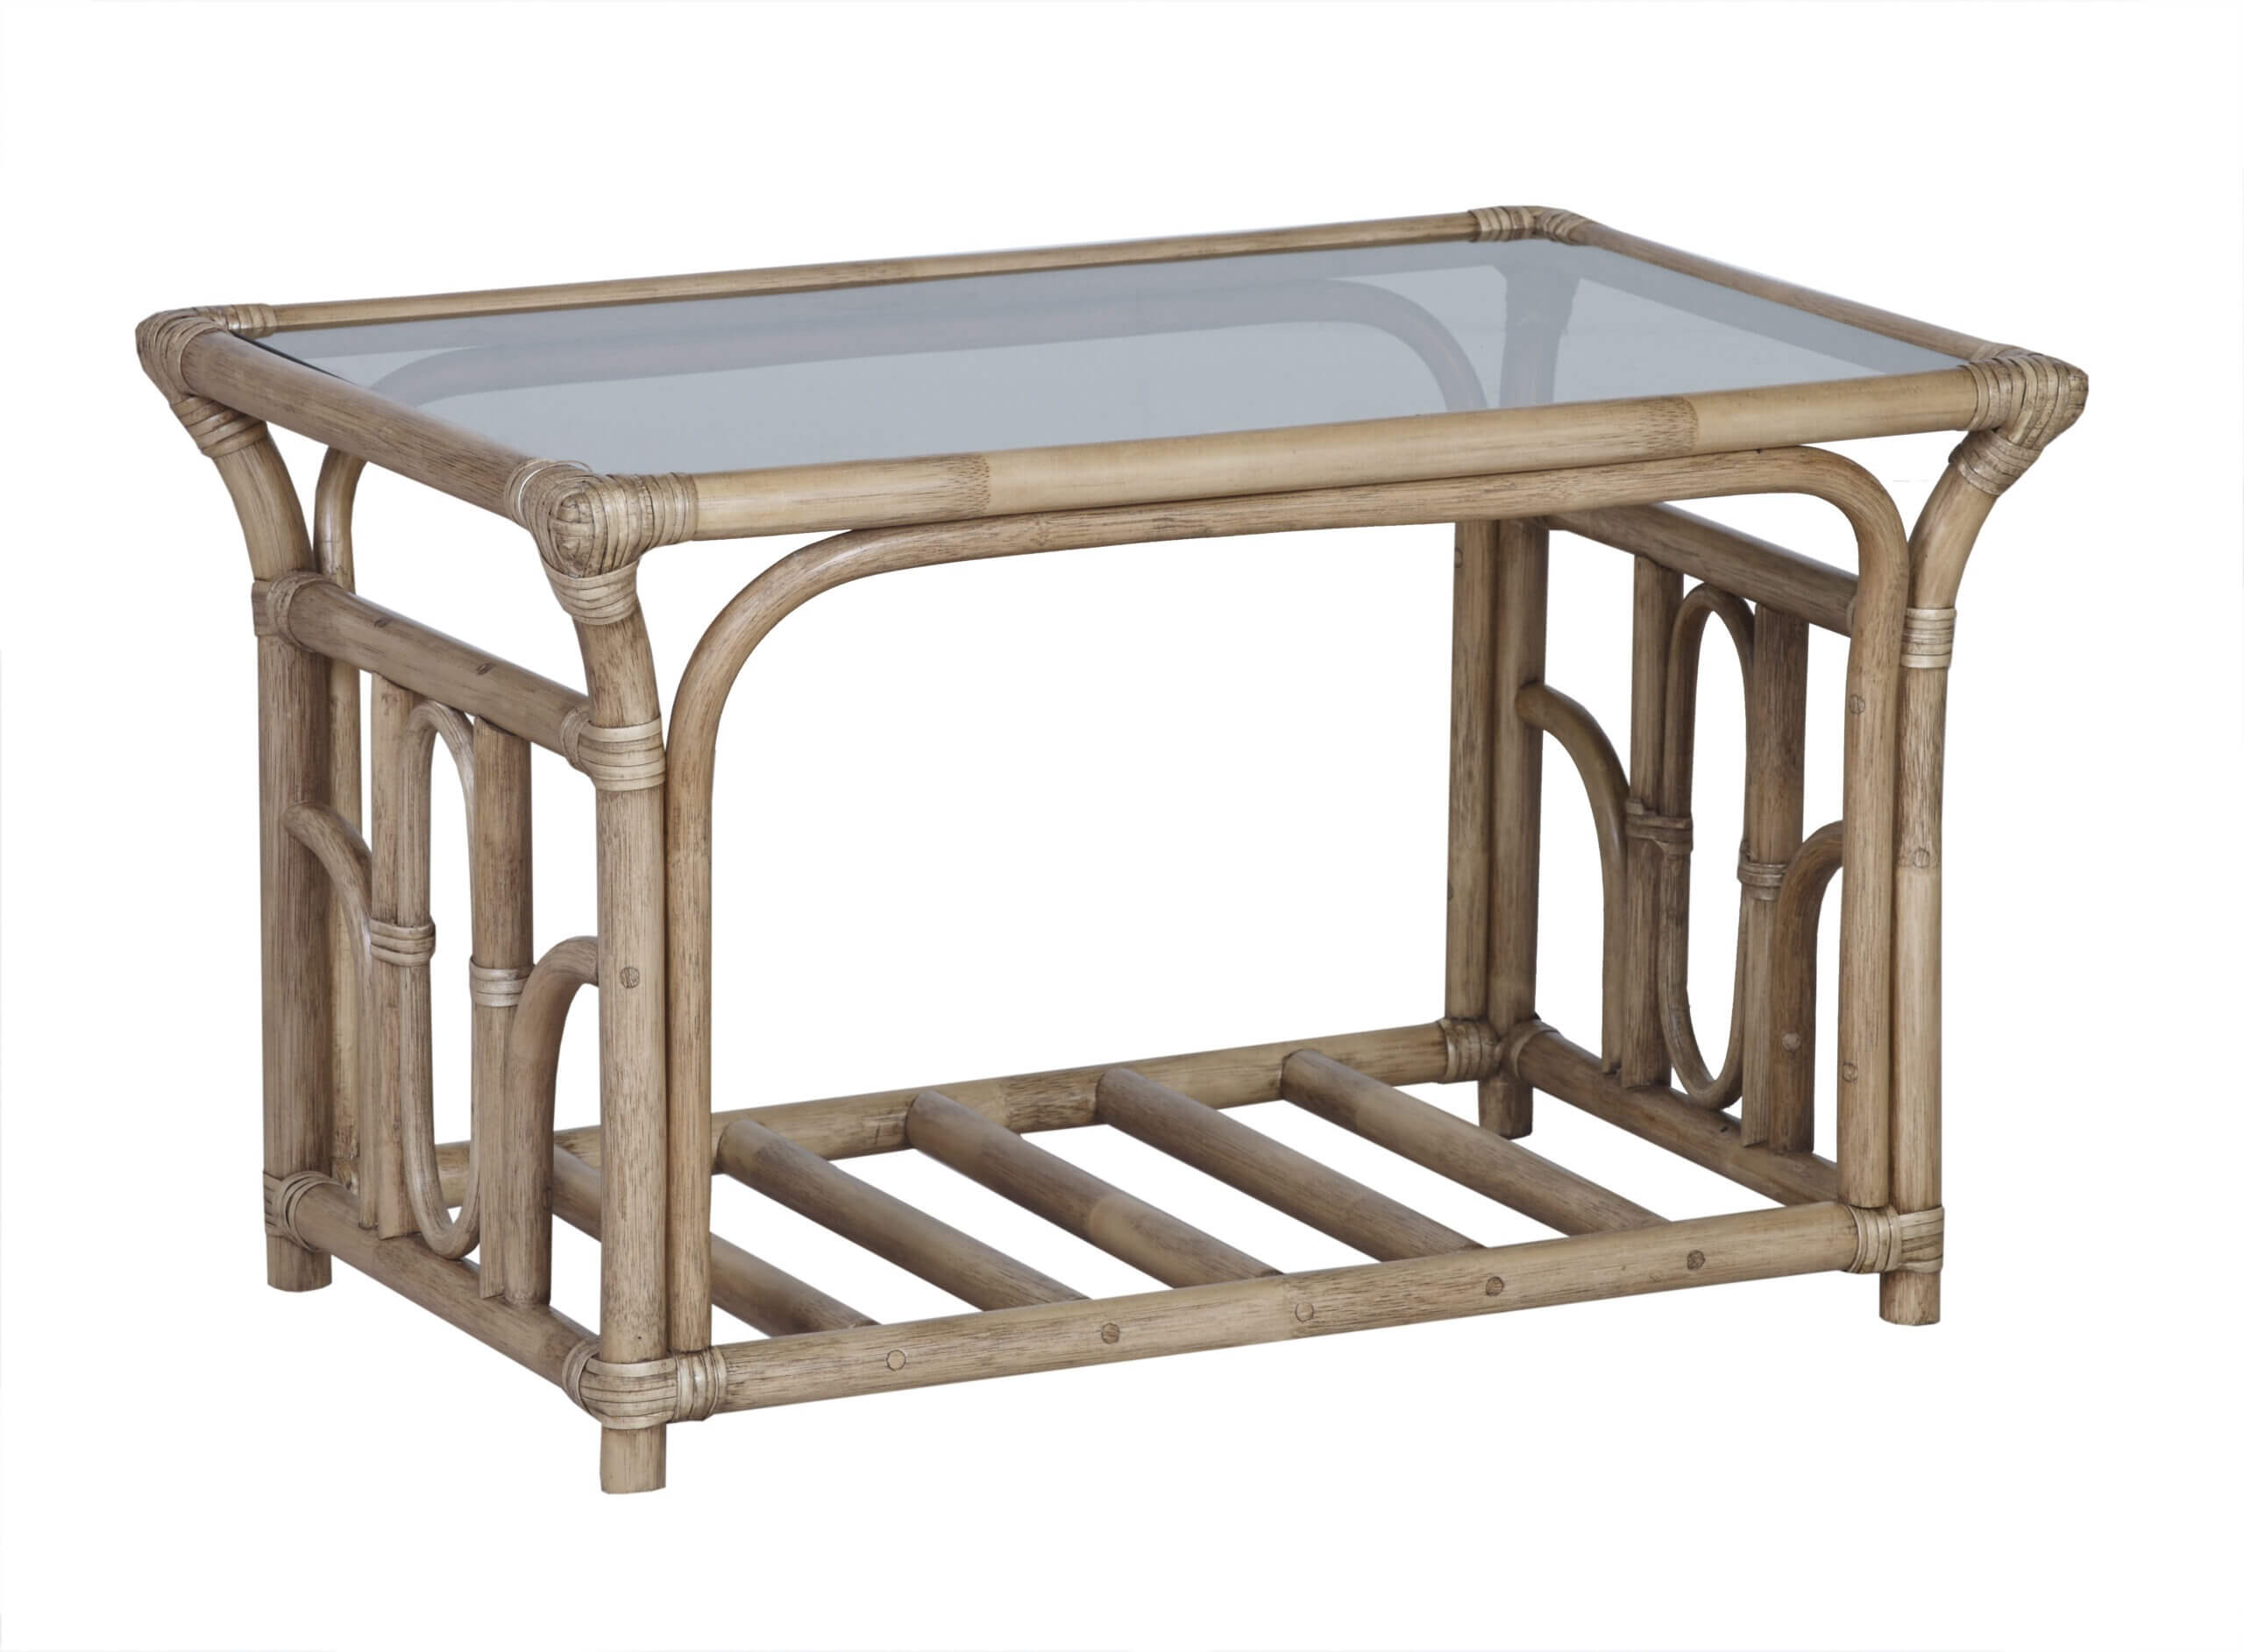 Showing image for Pesaro coffee table